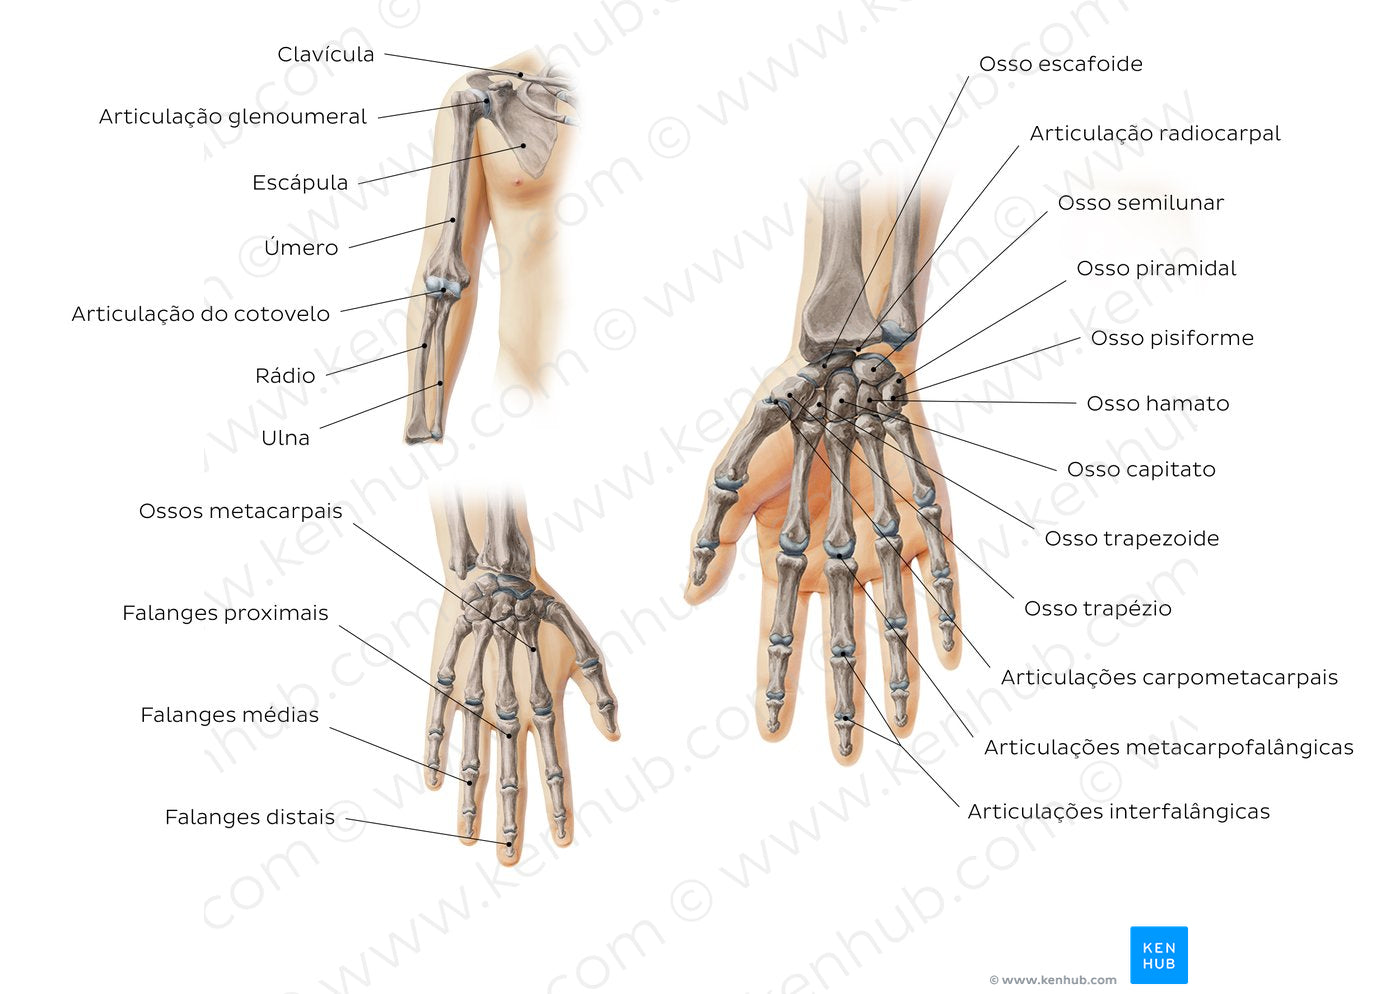 Main bones of the upper extremity (Portuguese)